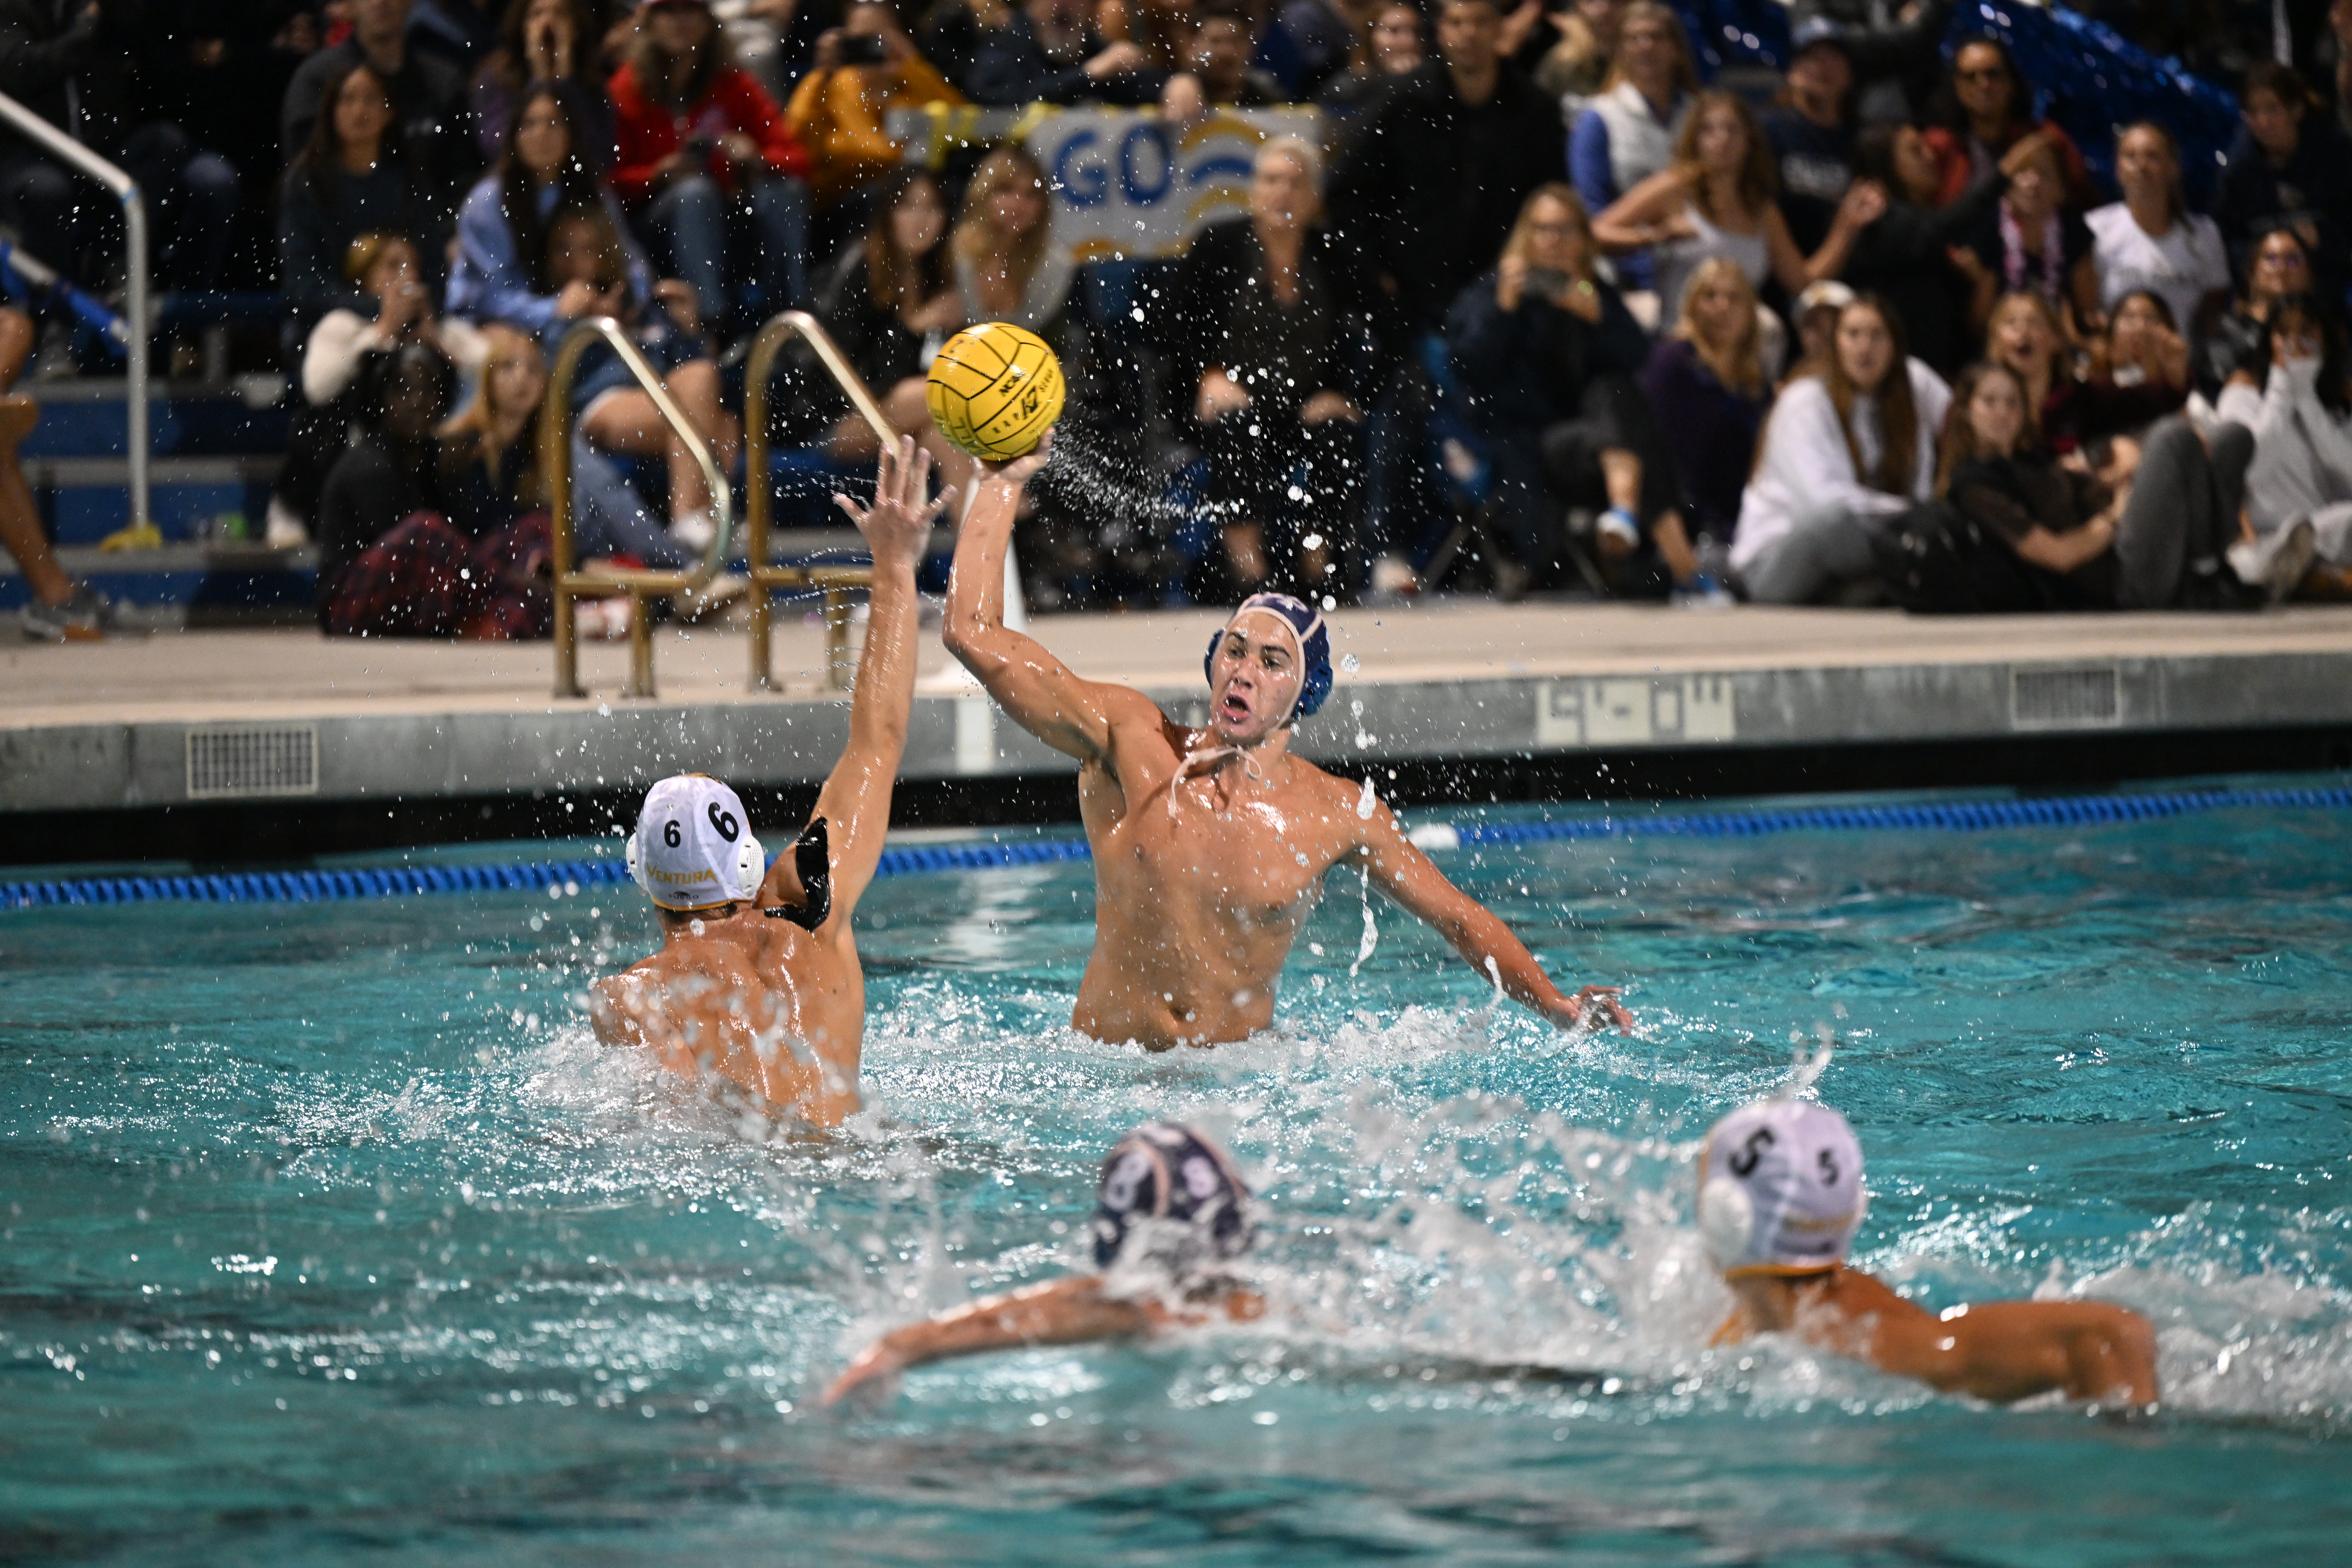 San Marcos and Dos Pueblos will compete against each other for a CIF Championship on Saturday.